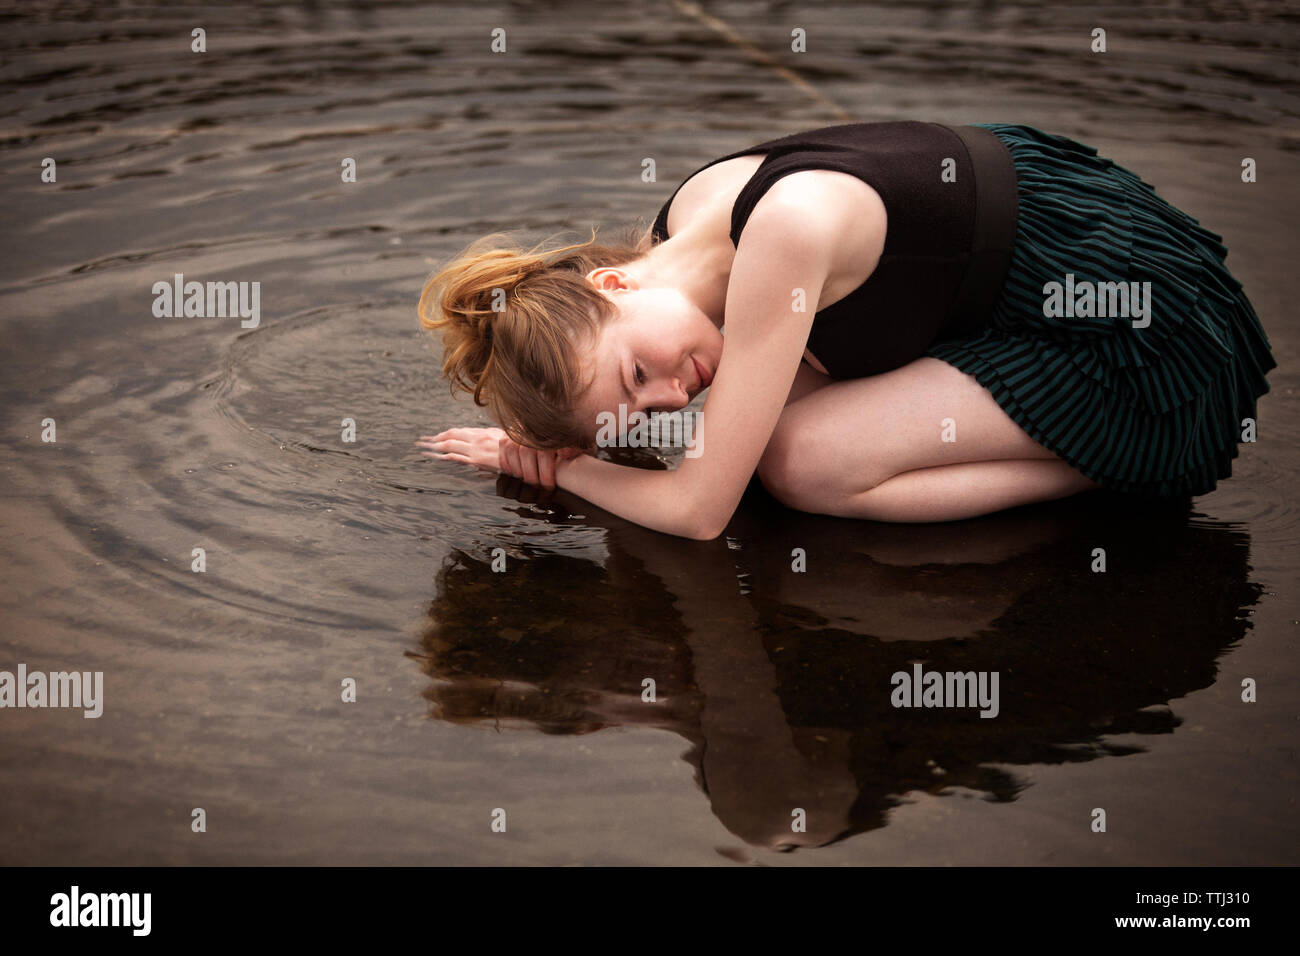 Side view of woman kneeling on shallow water at beach Stock Photo